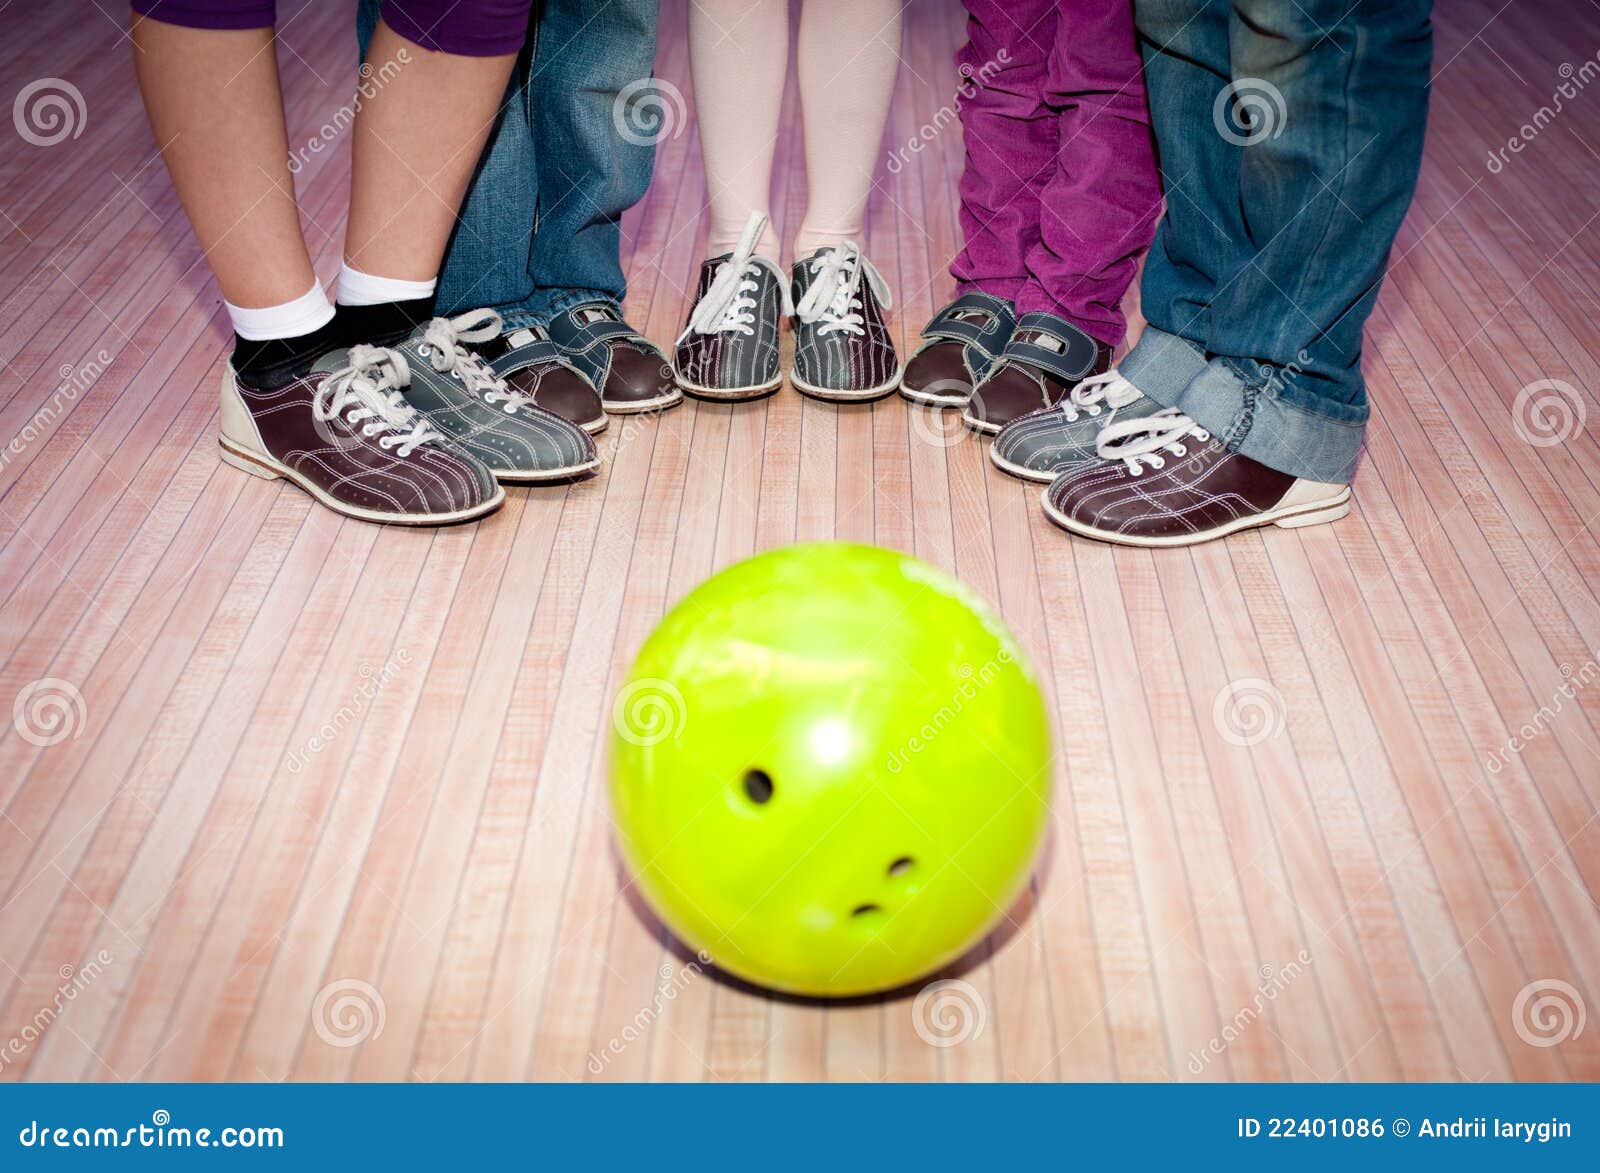 Closeup Of Bowling Shoes And Neon Green Ball Stock Photo